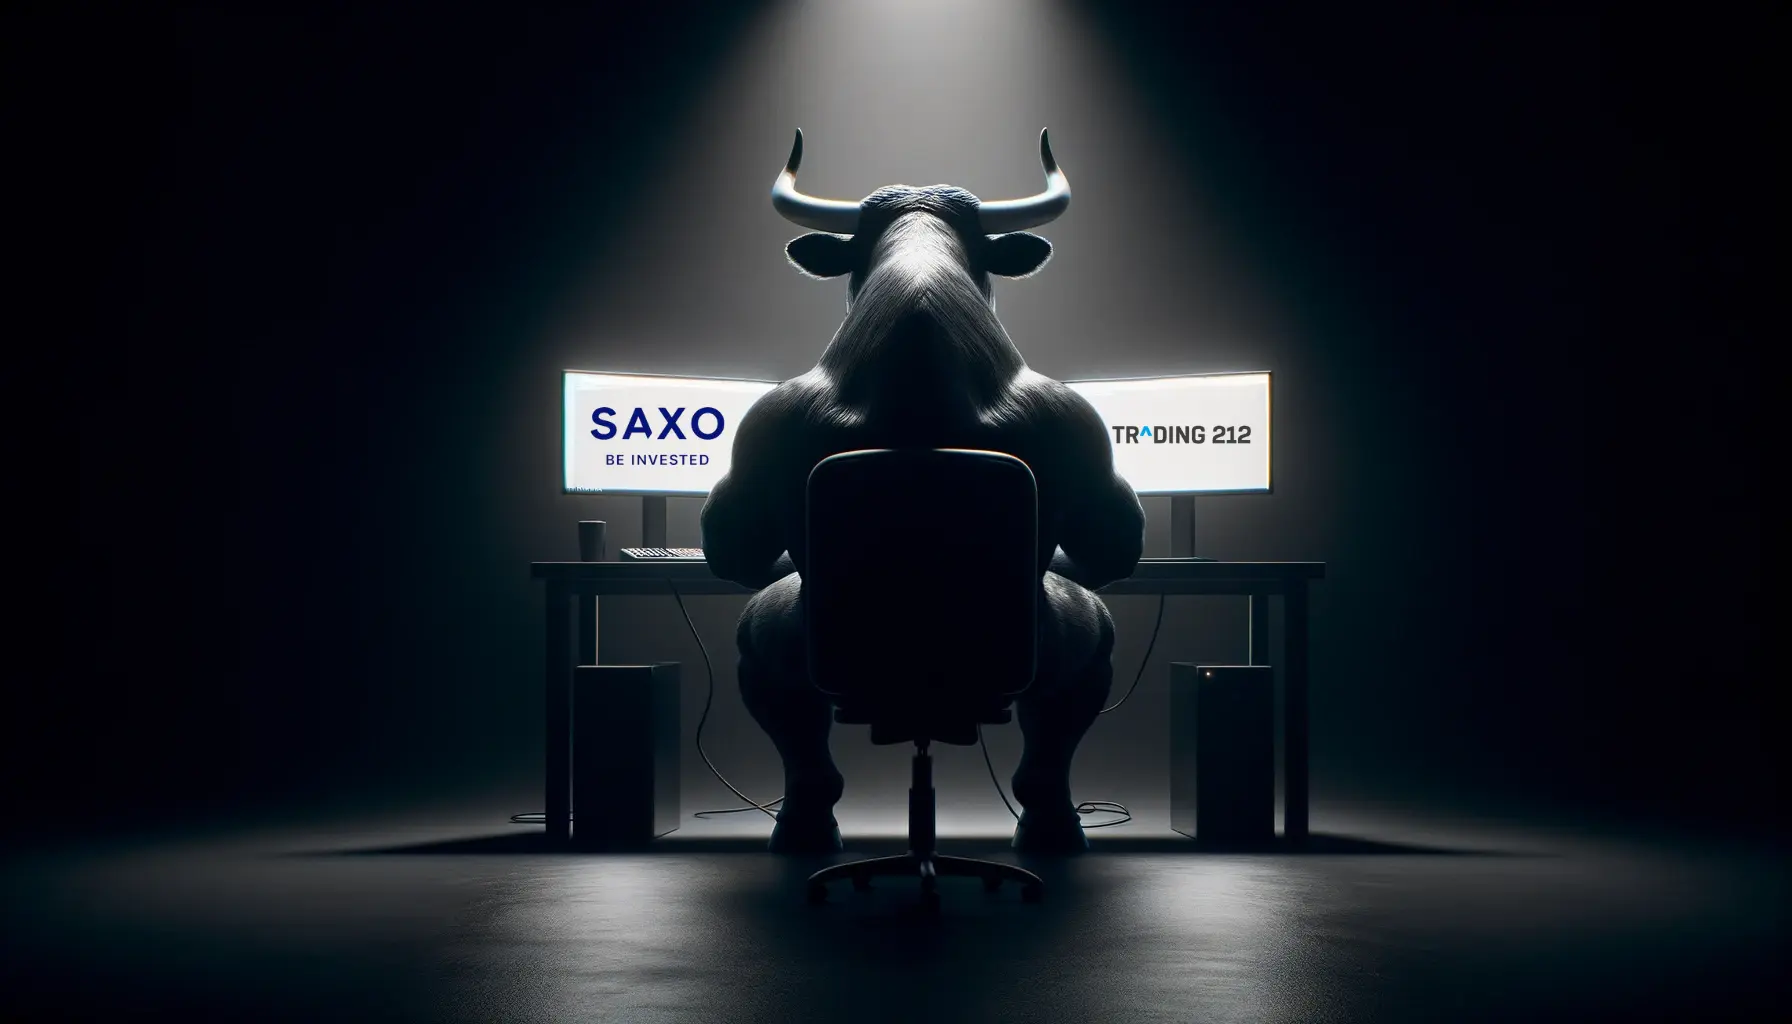 Bull silhouette at a trading desk with monitors, reviewing both trading 212 and saxo platforms